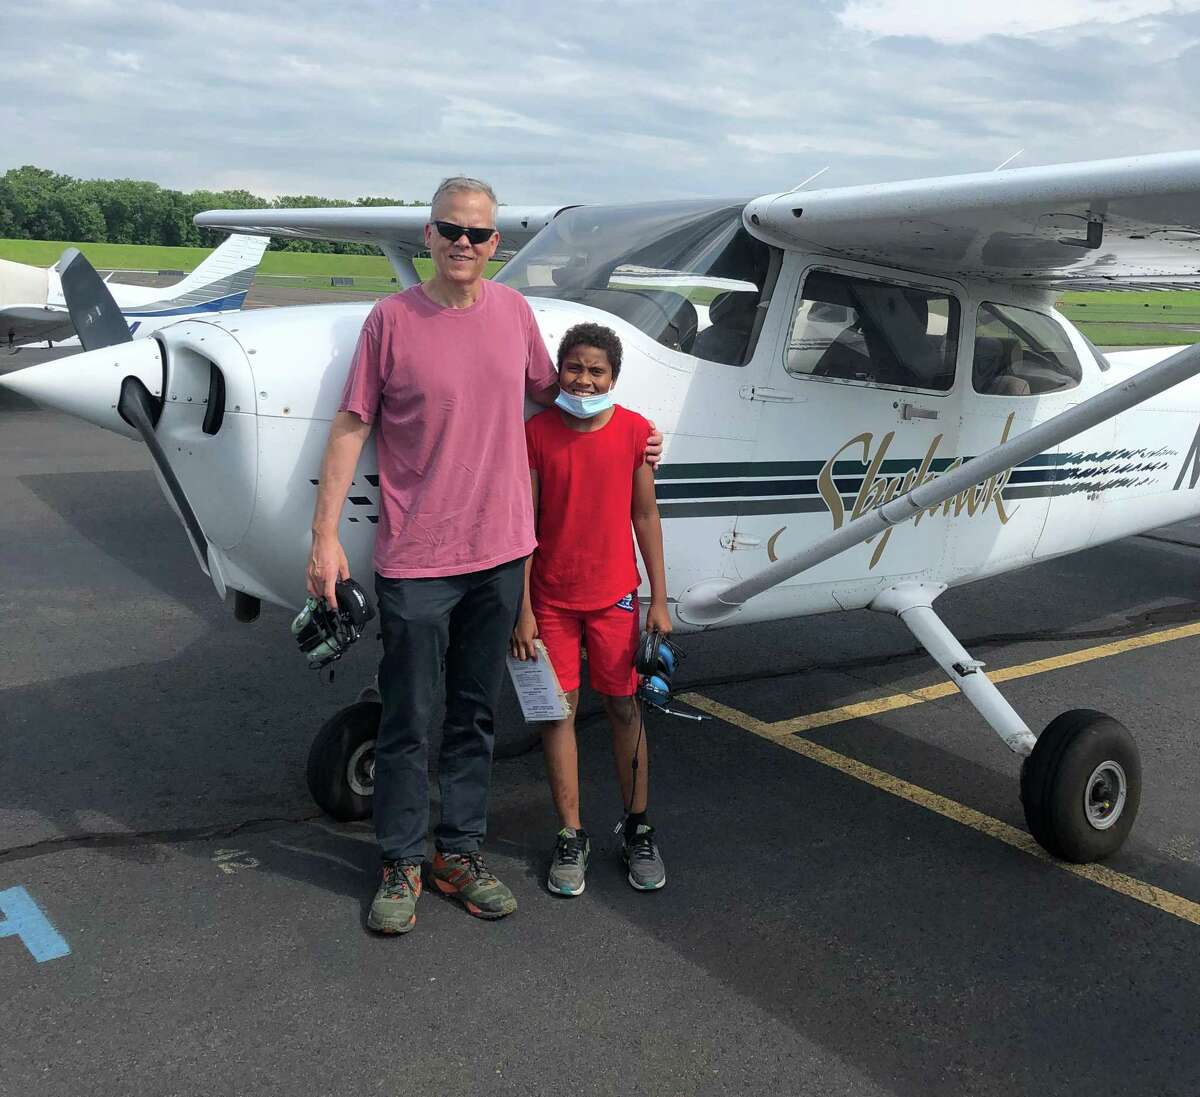 Connecticut’s “Big Brother of the Year” Charlie Gamble of Woodbridge took a small airplane tour over Hartford with Rell, right, a young man he is mentoring in the Big Brothers Big Sisters of Connecticut program.